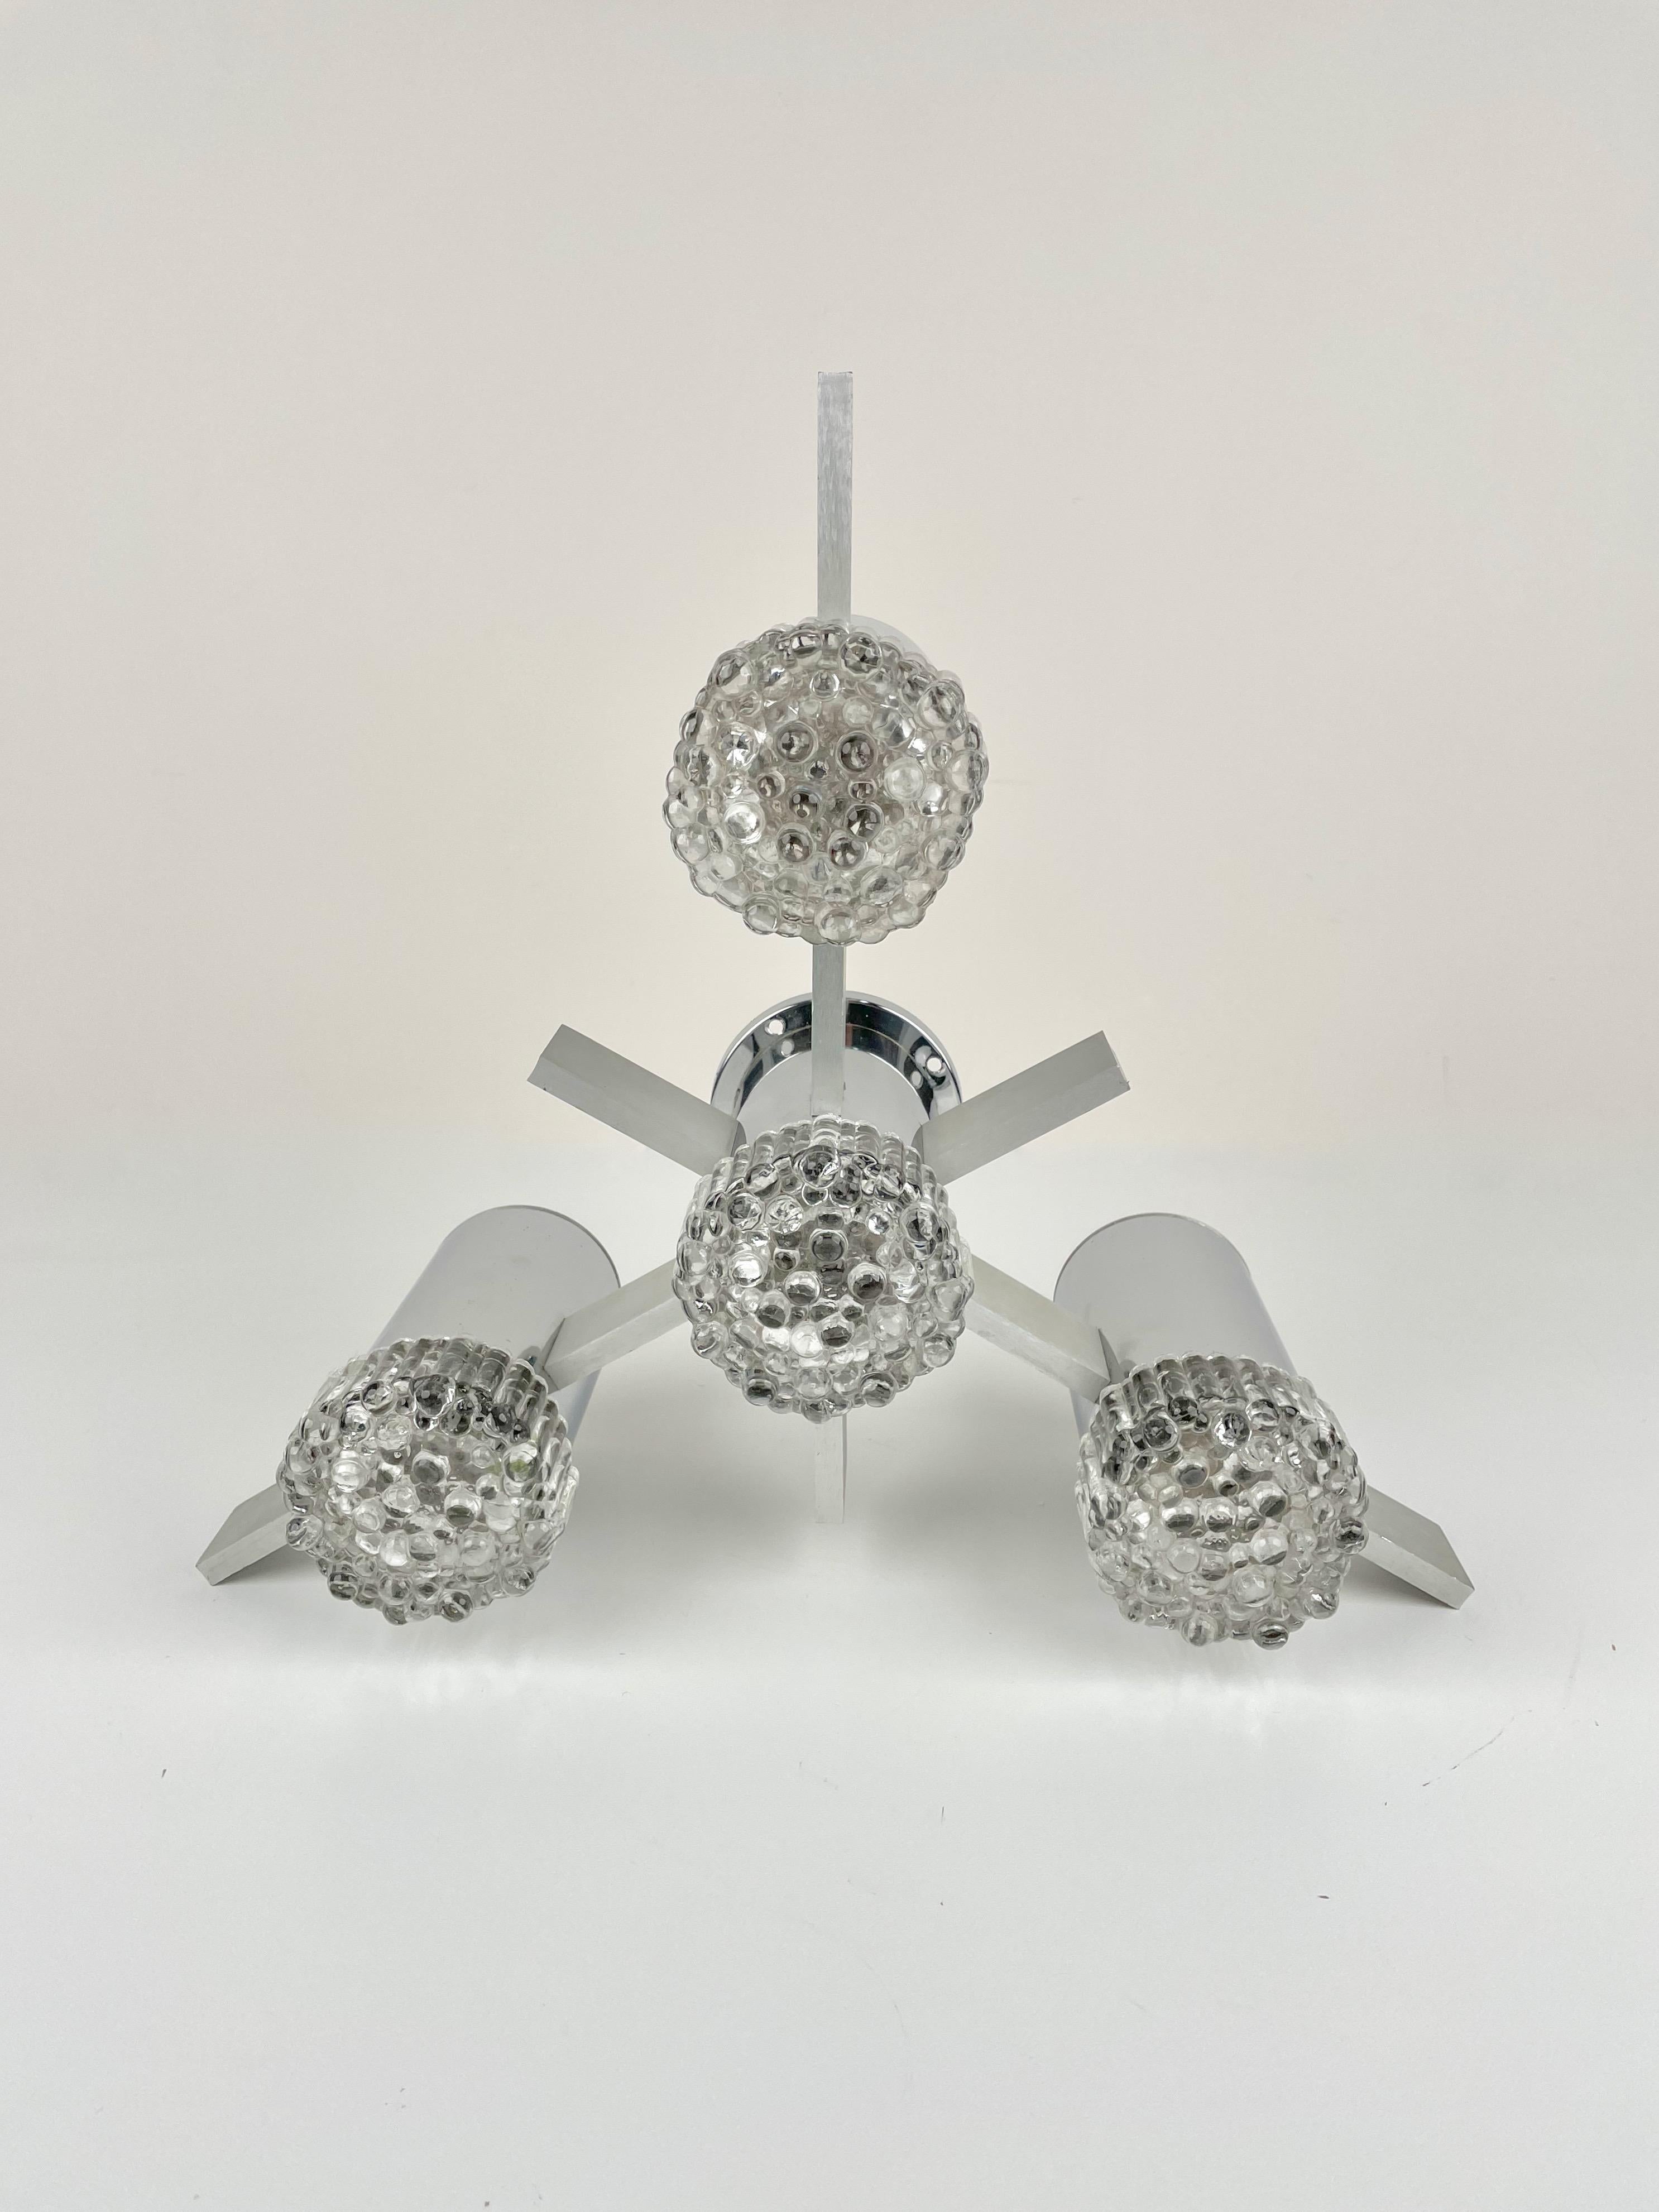 Abstract 1970s chandelier or sconces designed by Gaetano Sciolari for his Italian family's noted lighting company of the same last name. Polished chrome metal tubes house each bulb and are capped by a molded geometric pattern glass cover. Brushed